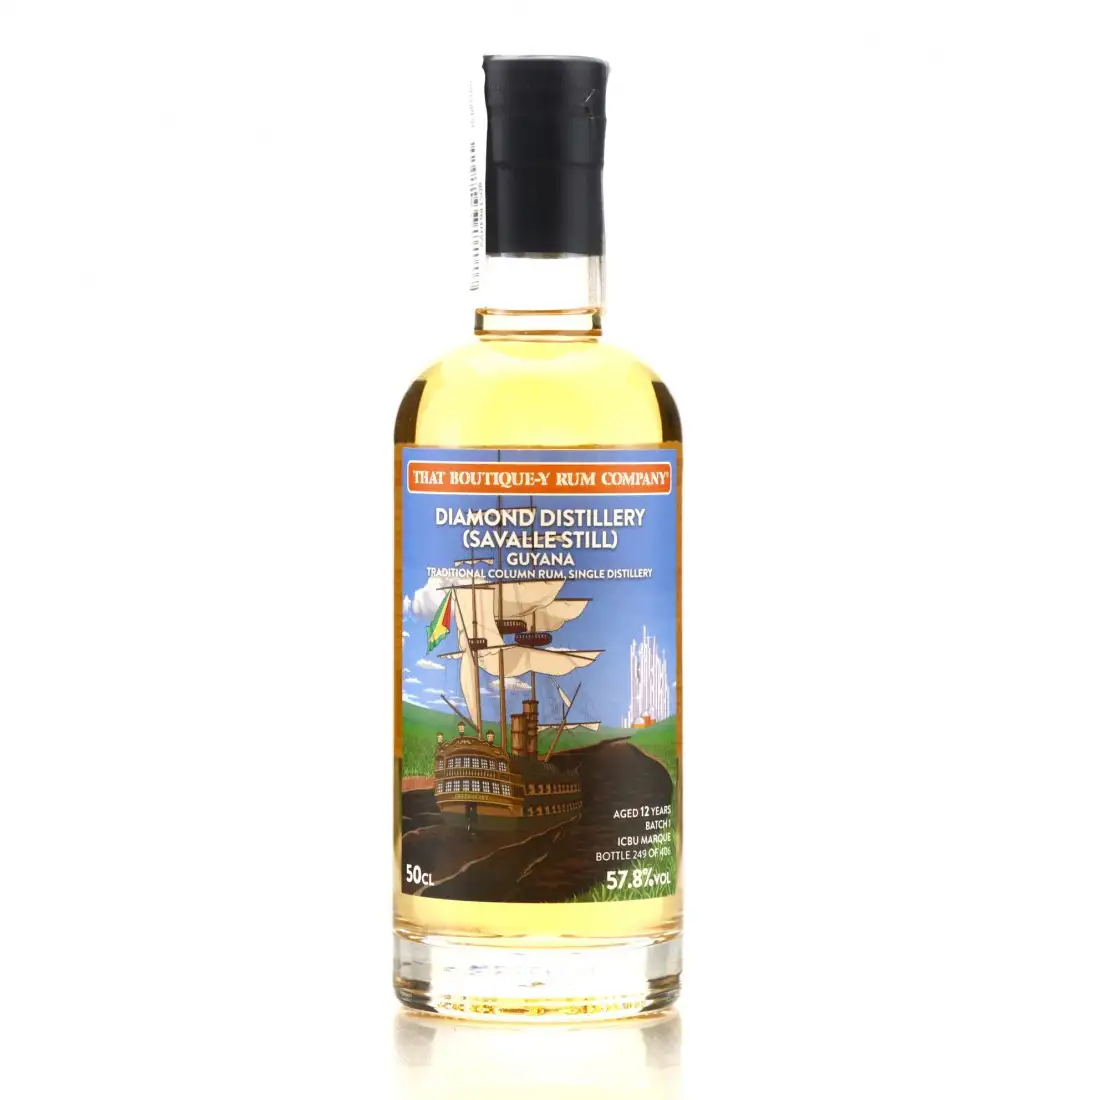 Image of the front of the bottle of the rum Savalle Still ICBU